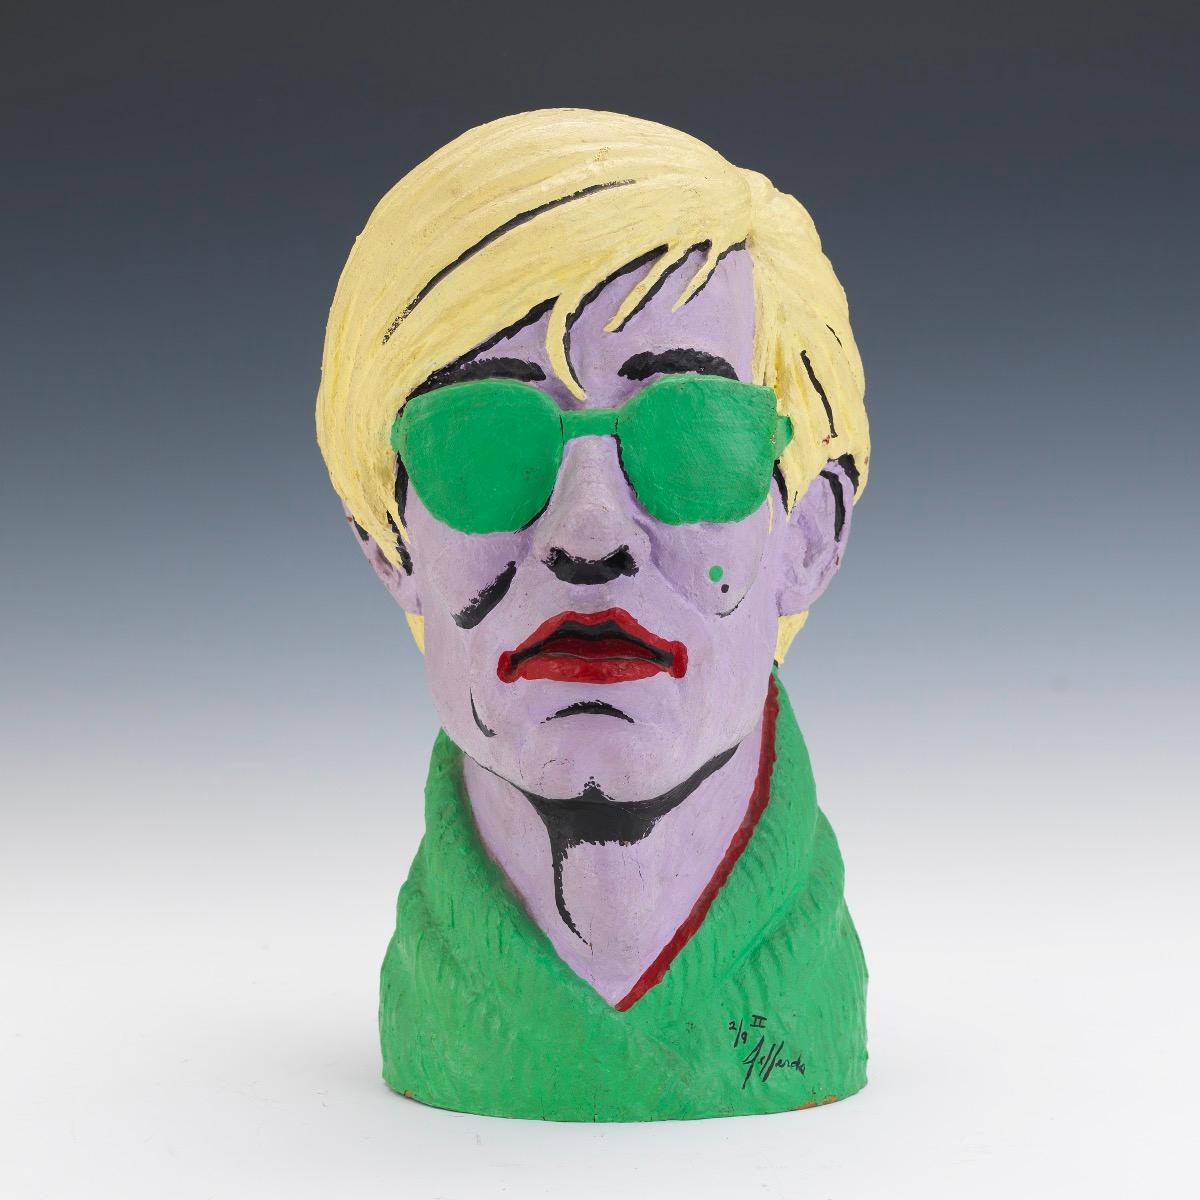 Limited edition American polychromed rubber bust of Andy Warhol by Jefferds, 20th Century.

Signed 